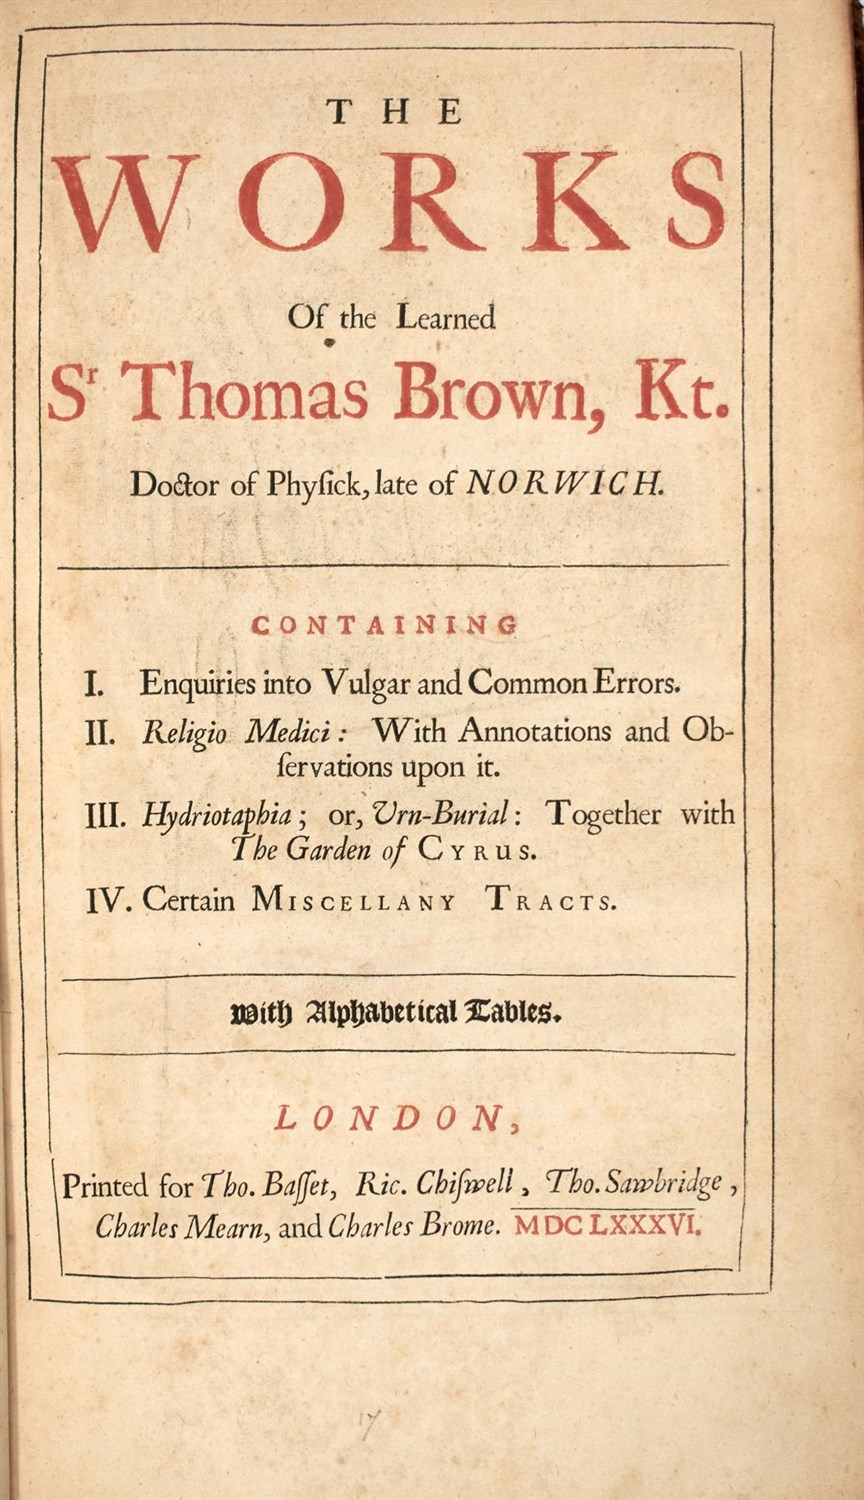 Lot 11 - BROWN, SIR THOMAS. The Works of the Learned...